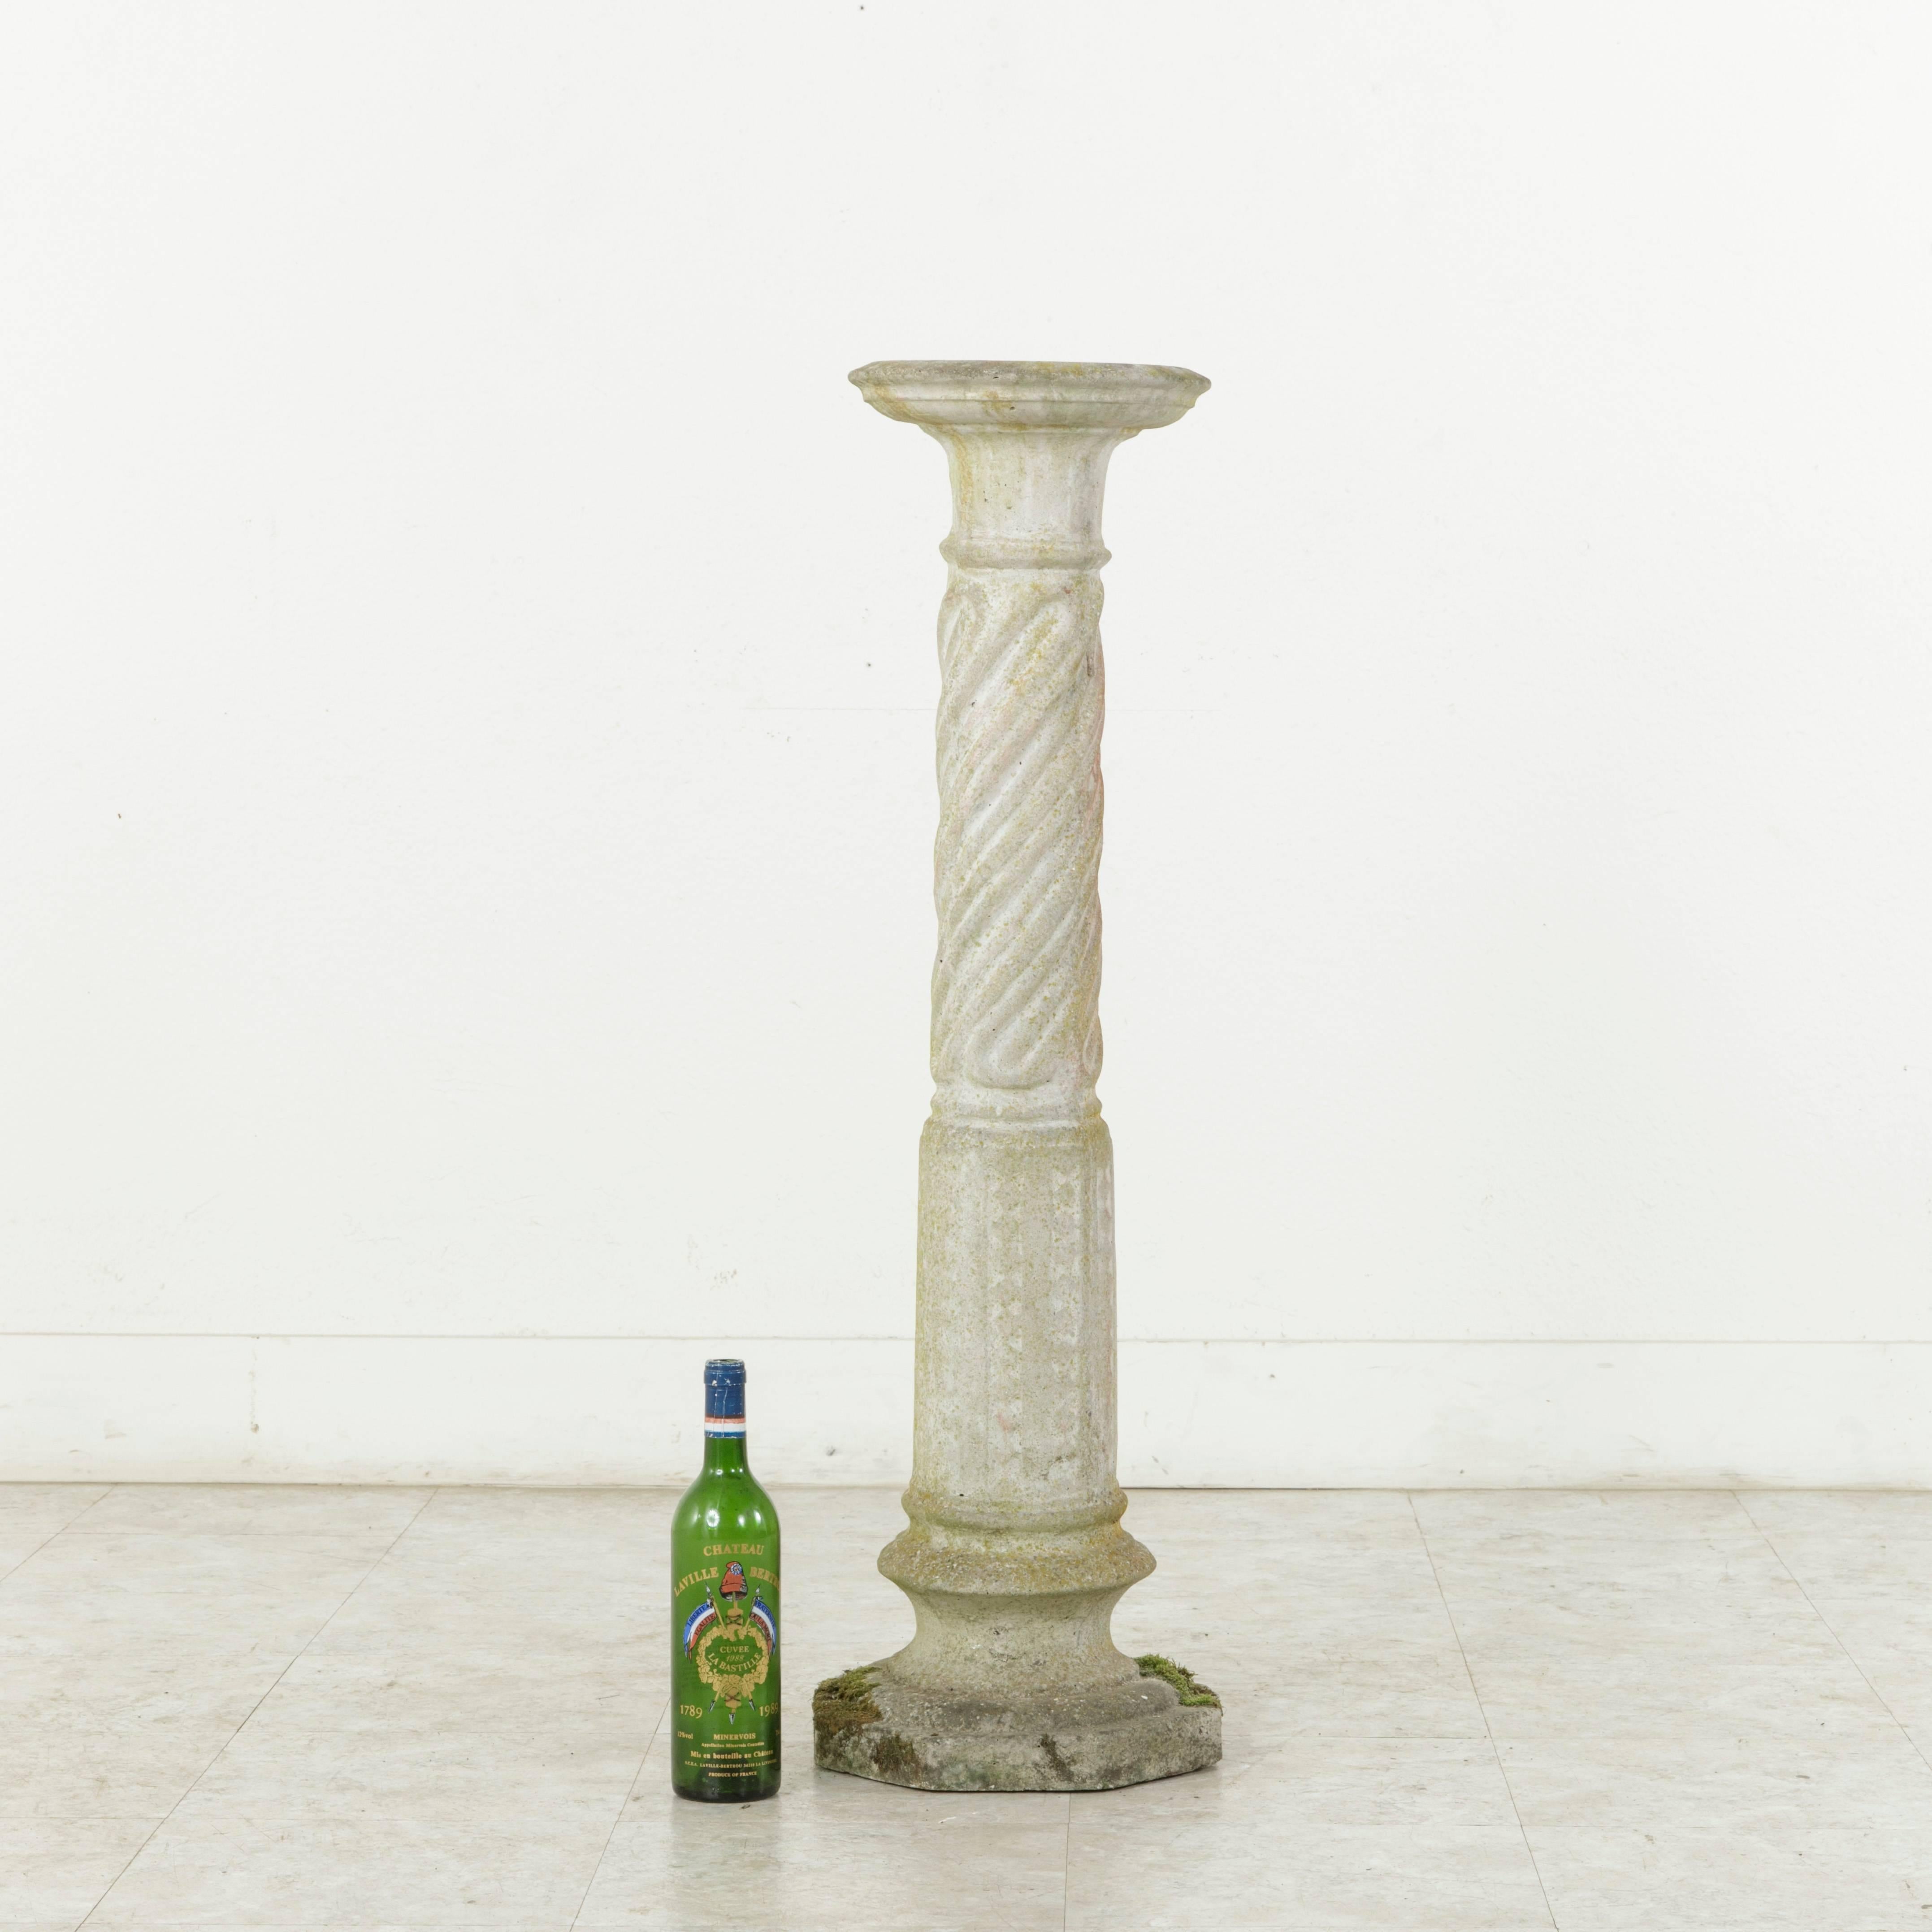 Originally from the gardens of a manor house in Normandy, France, this early 20th century cast stone column stands at 39 inches in height and features spiral fluting on the upper half and a diamond pattern on the lower half. Its beautifully aged